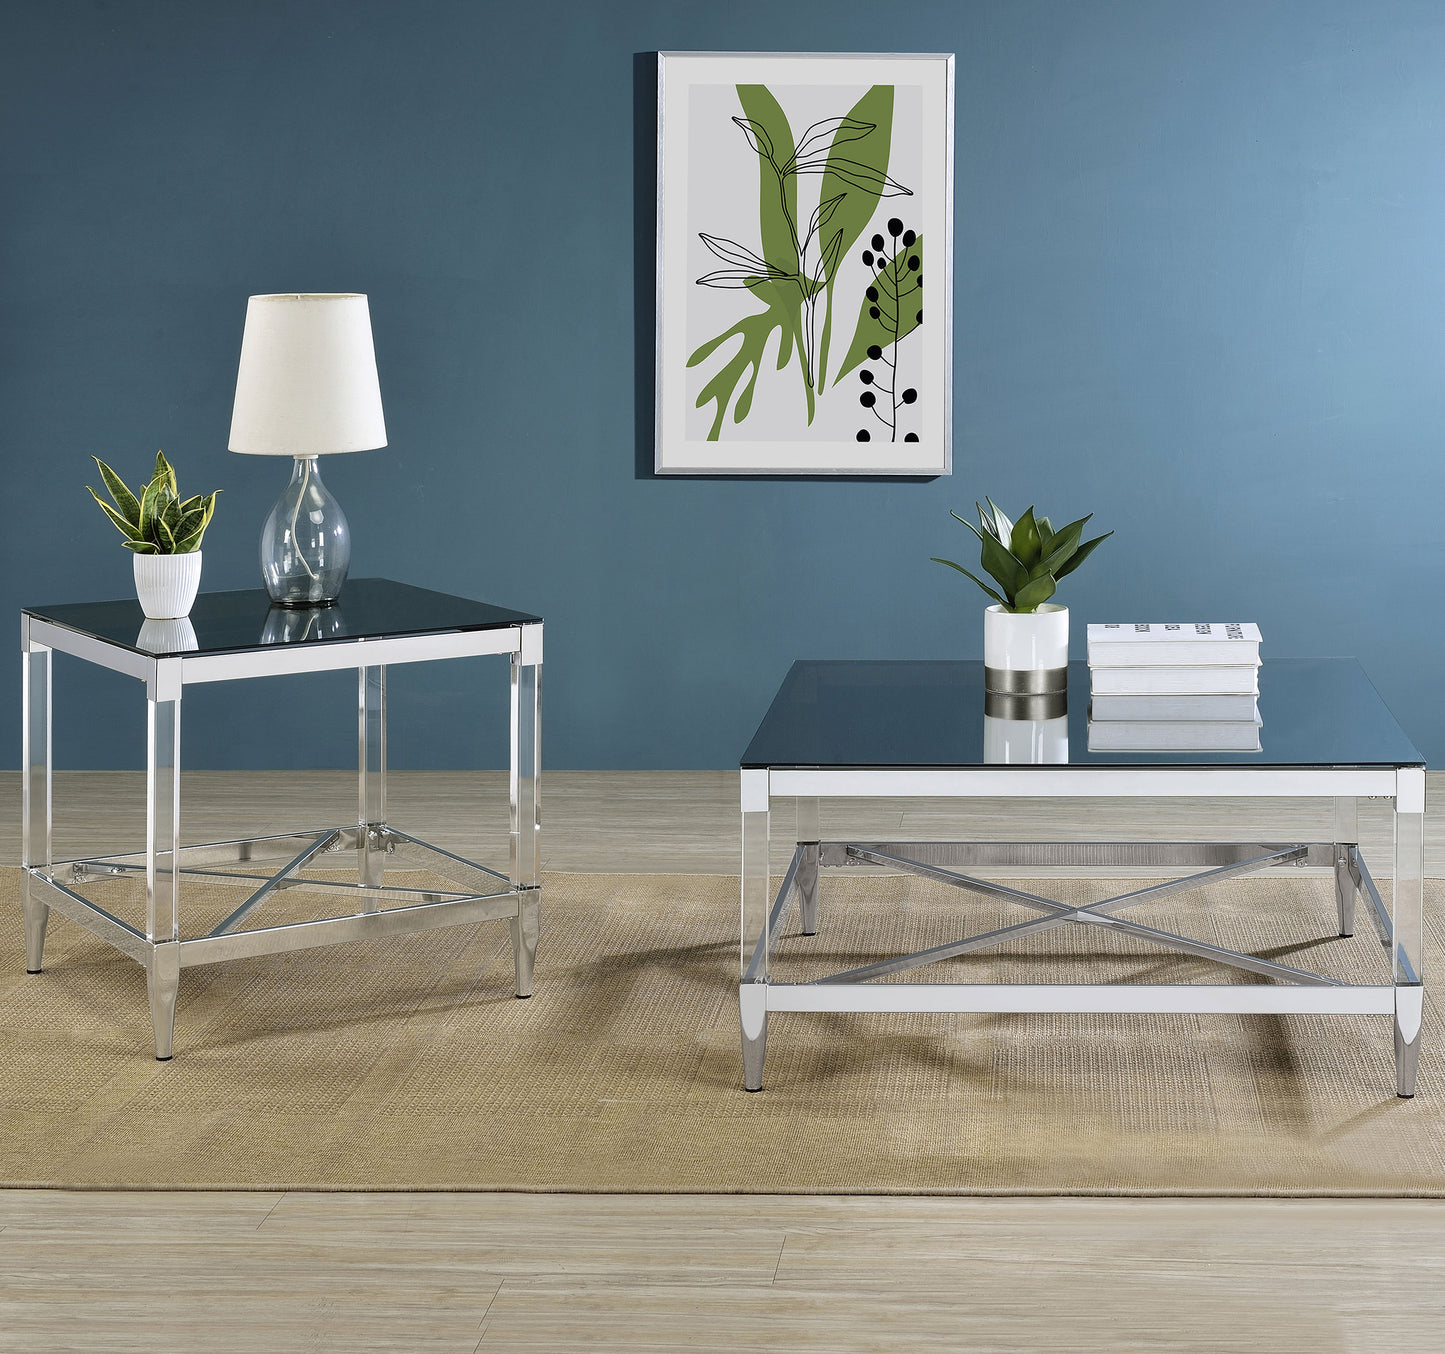 Lindley Square Coffee Table with Acrylic Legs and Tempered Mirror Top Chrome